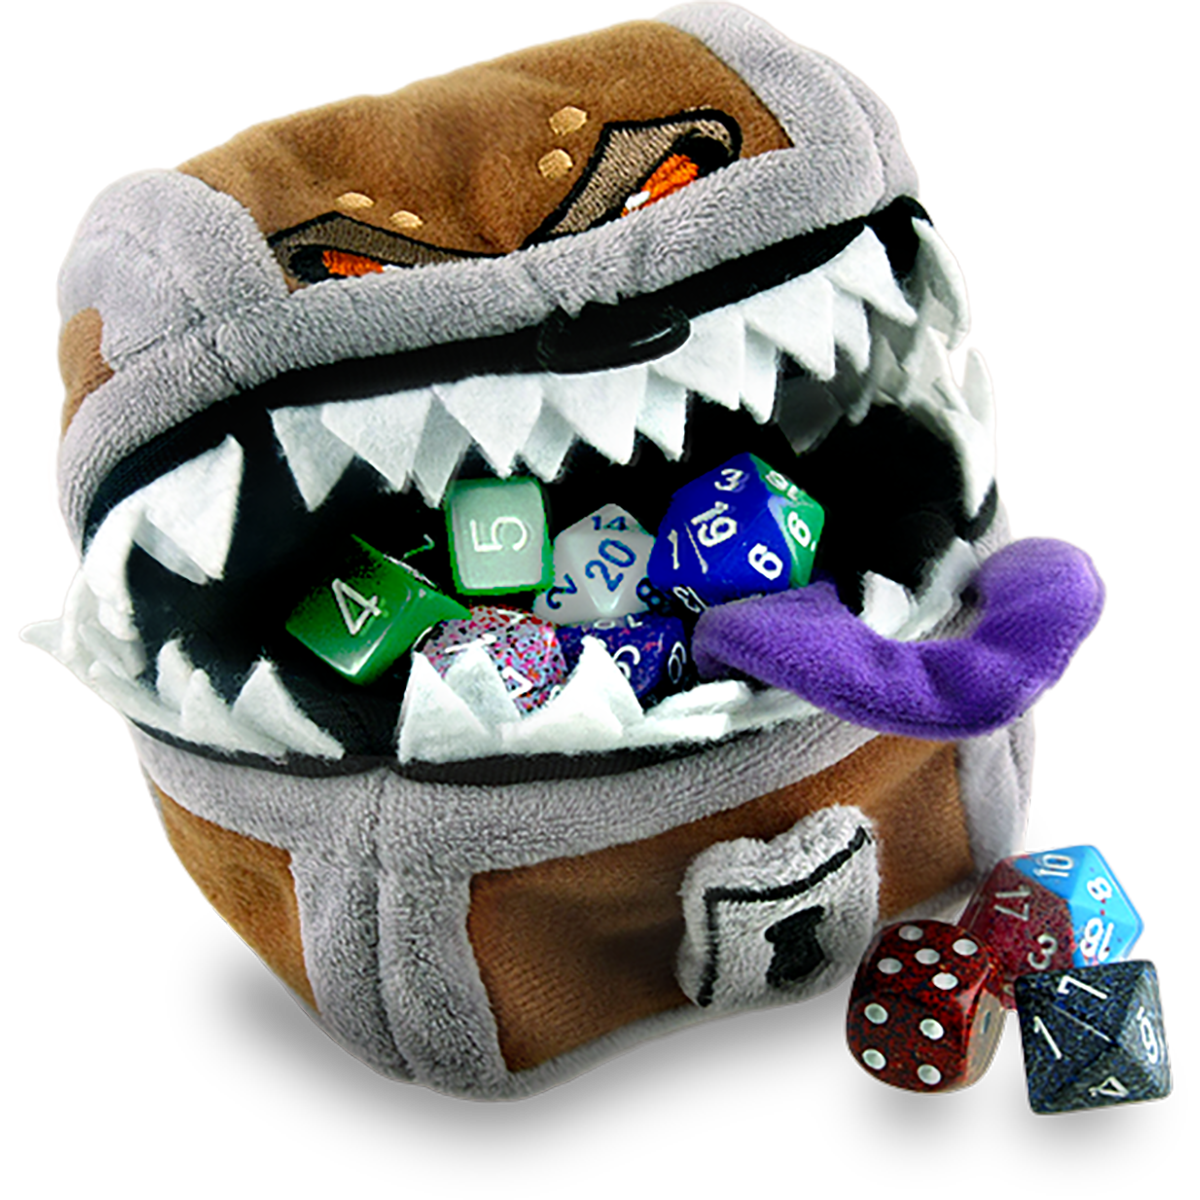 D&D Gamer Pouch: Bag of Holding